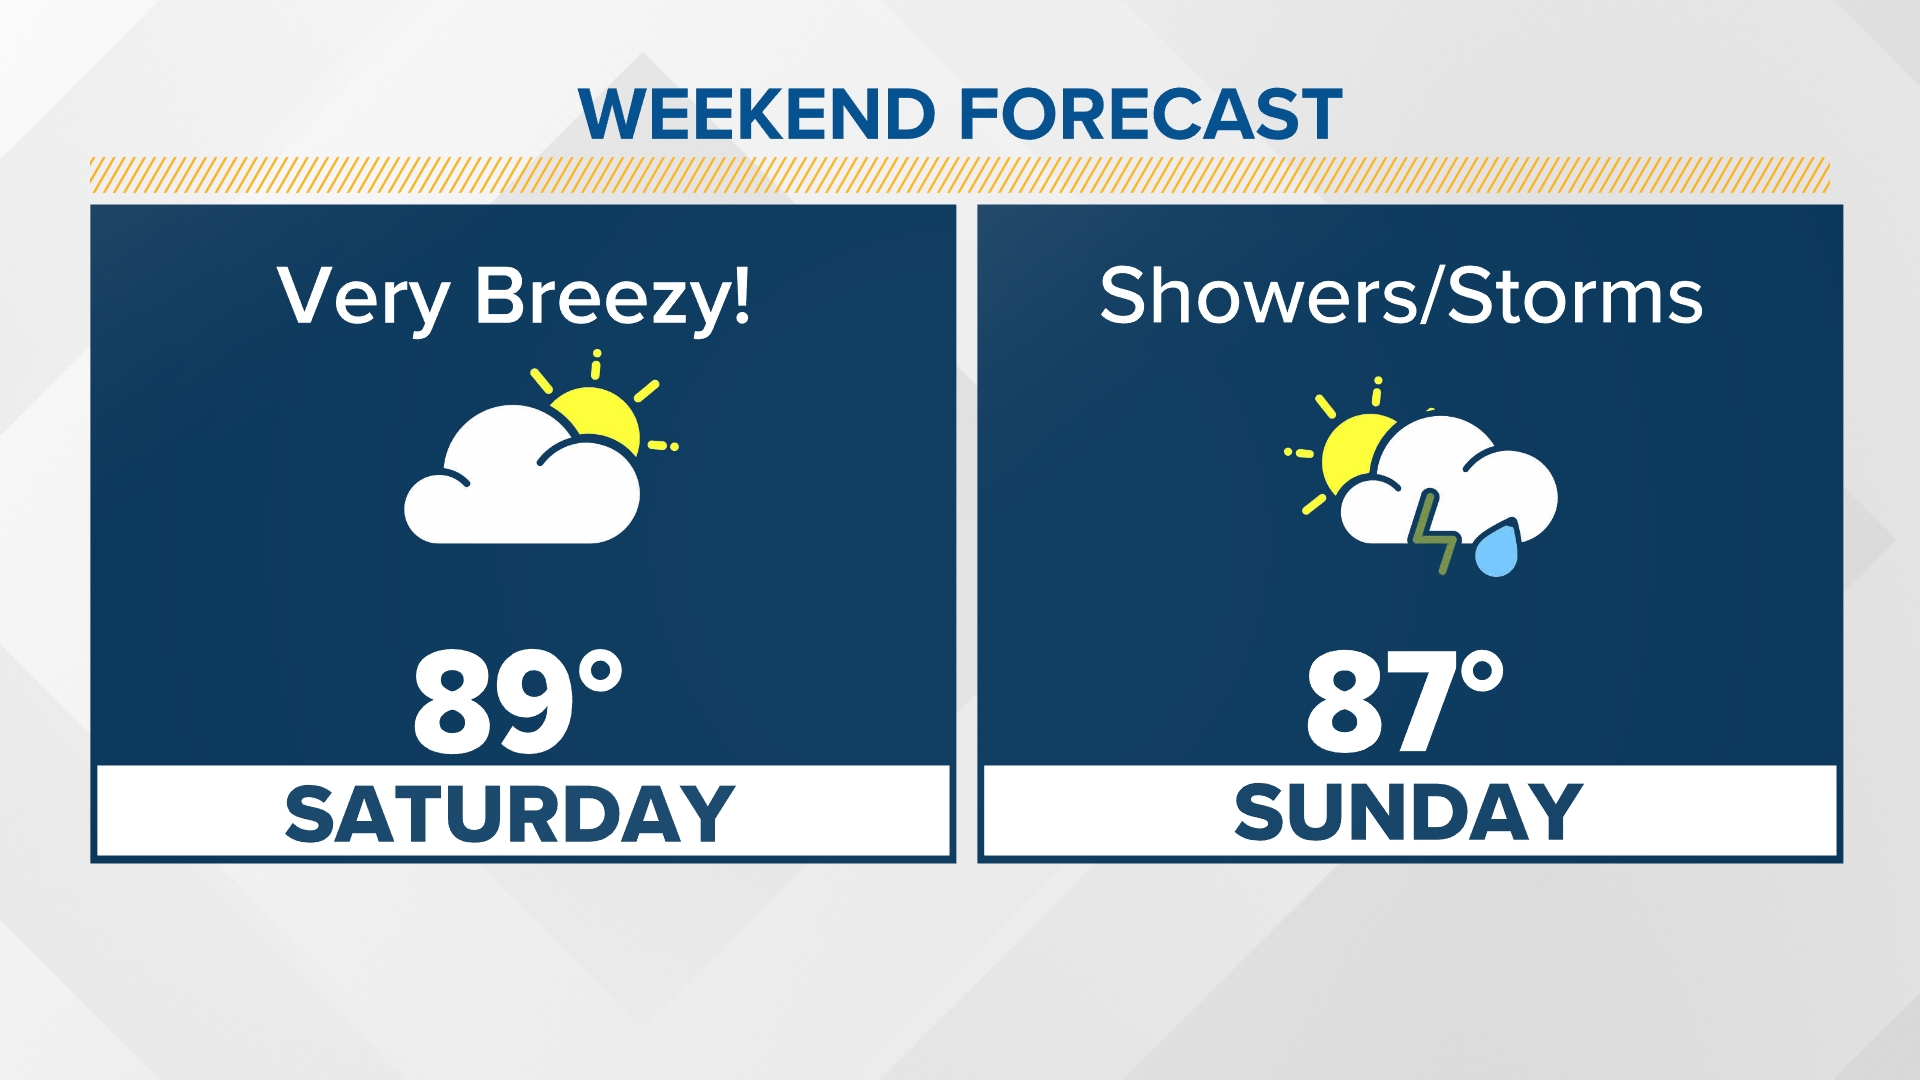 Weather conditions will be breezy Friday with a chance for rain. We will be rain-free on Saturday but Sunday is looking pretty wet.